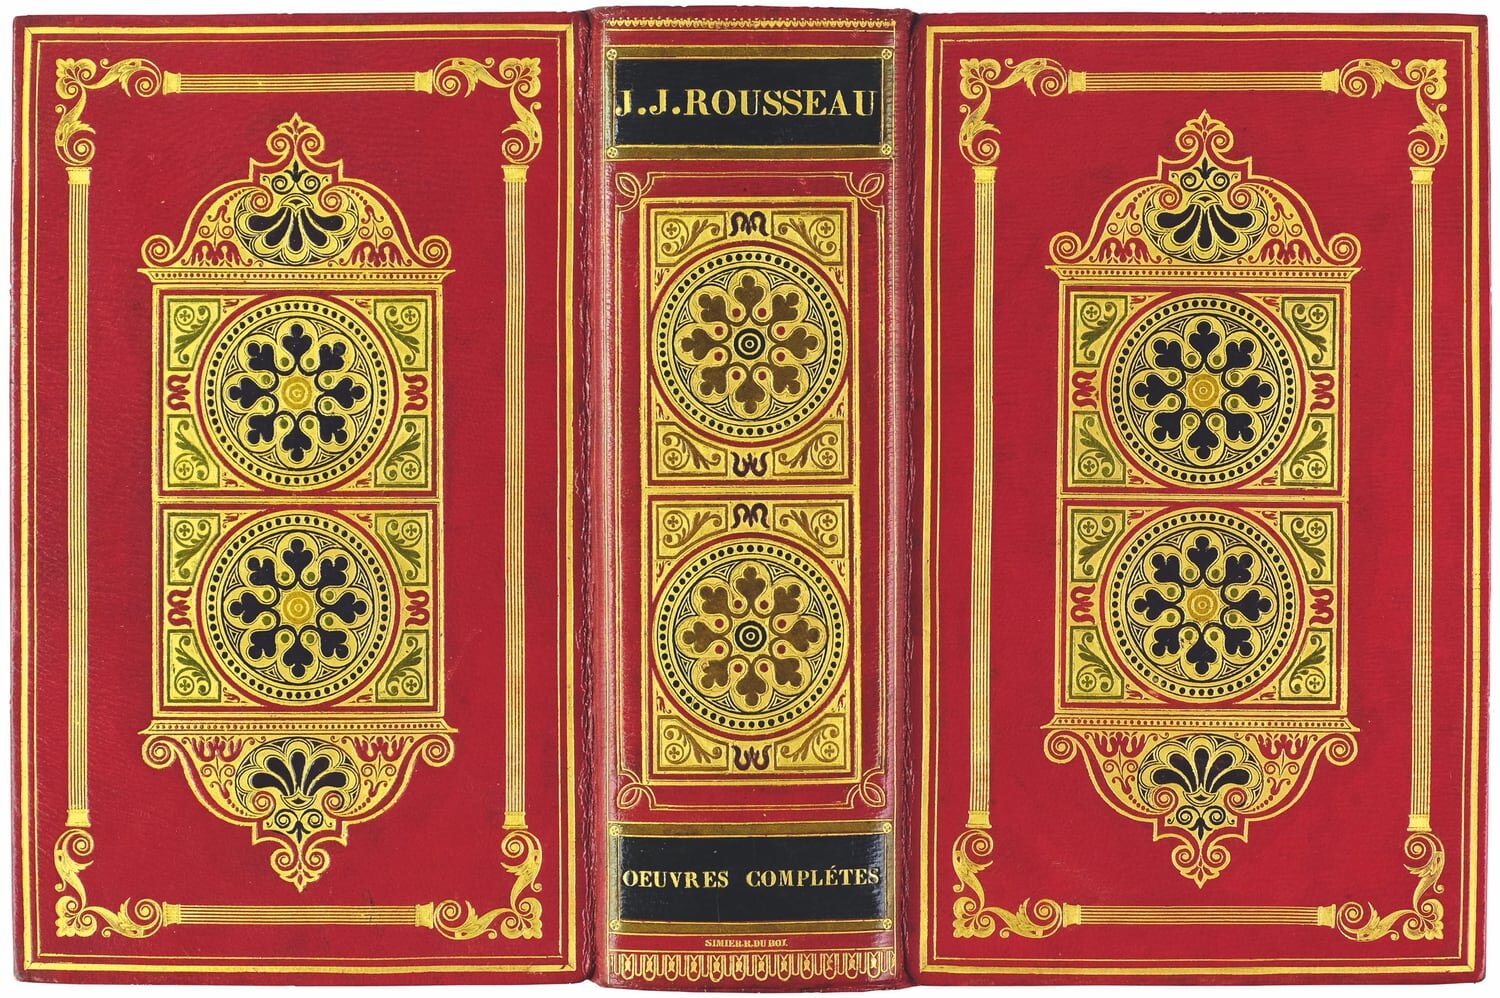  Two bindings by Simier; an edition of Molière [no. 449], and the complete works of Rousseau [no. 542] 